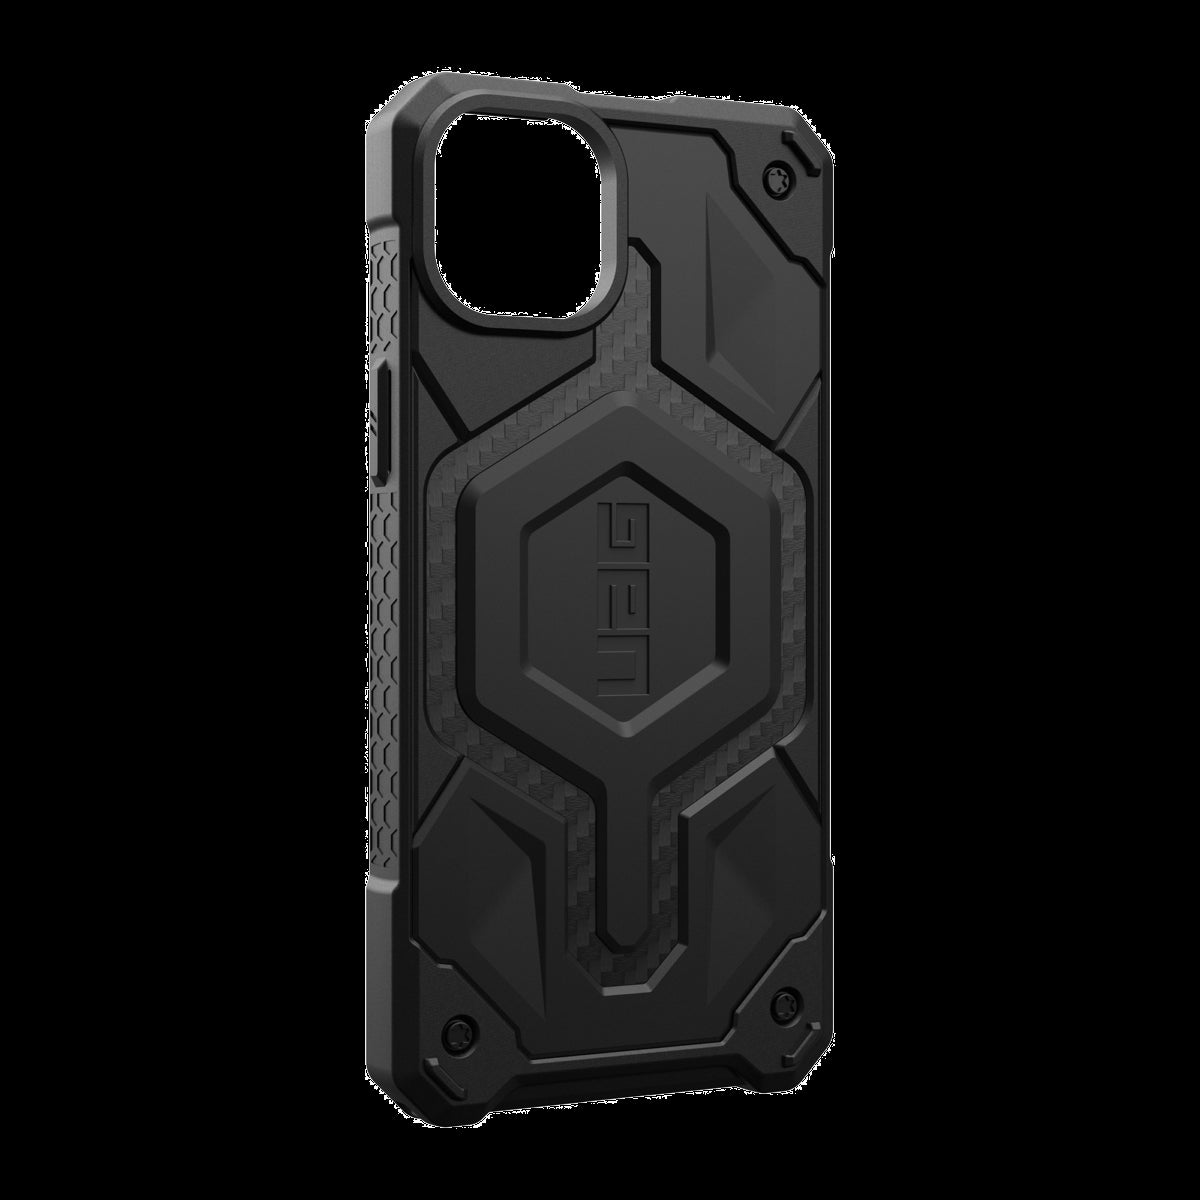 The quintessential, all-terrain, rugged protective case now available with built-in MagSafe module. The UAG Monarch Pro is equipped with premium materials for premium protection.